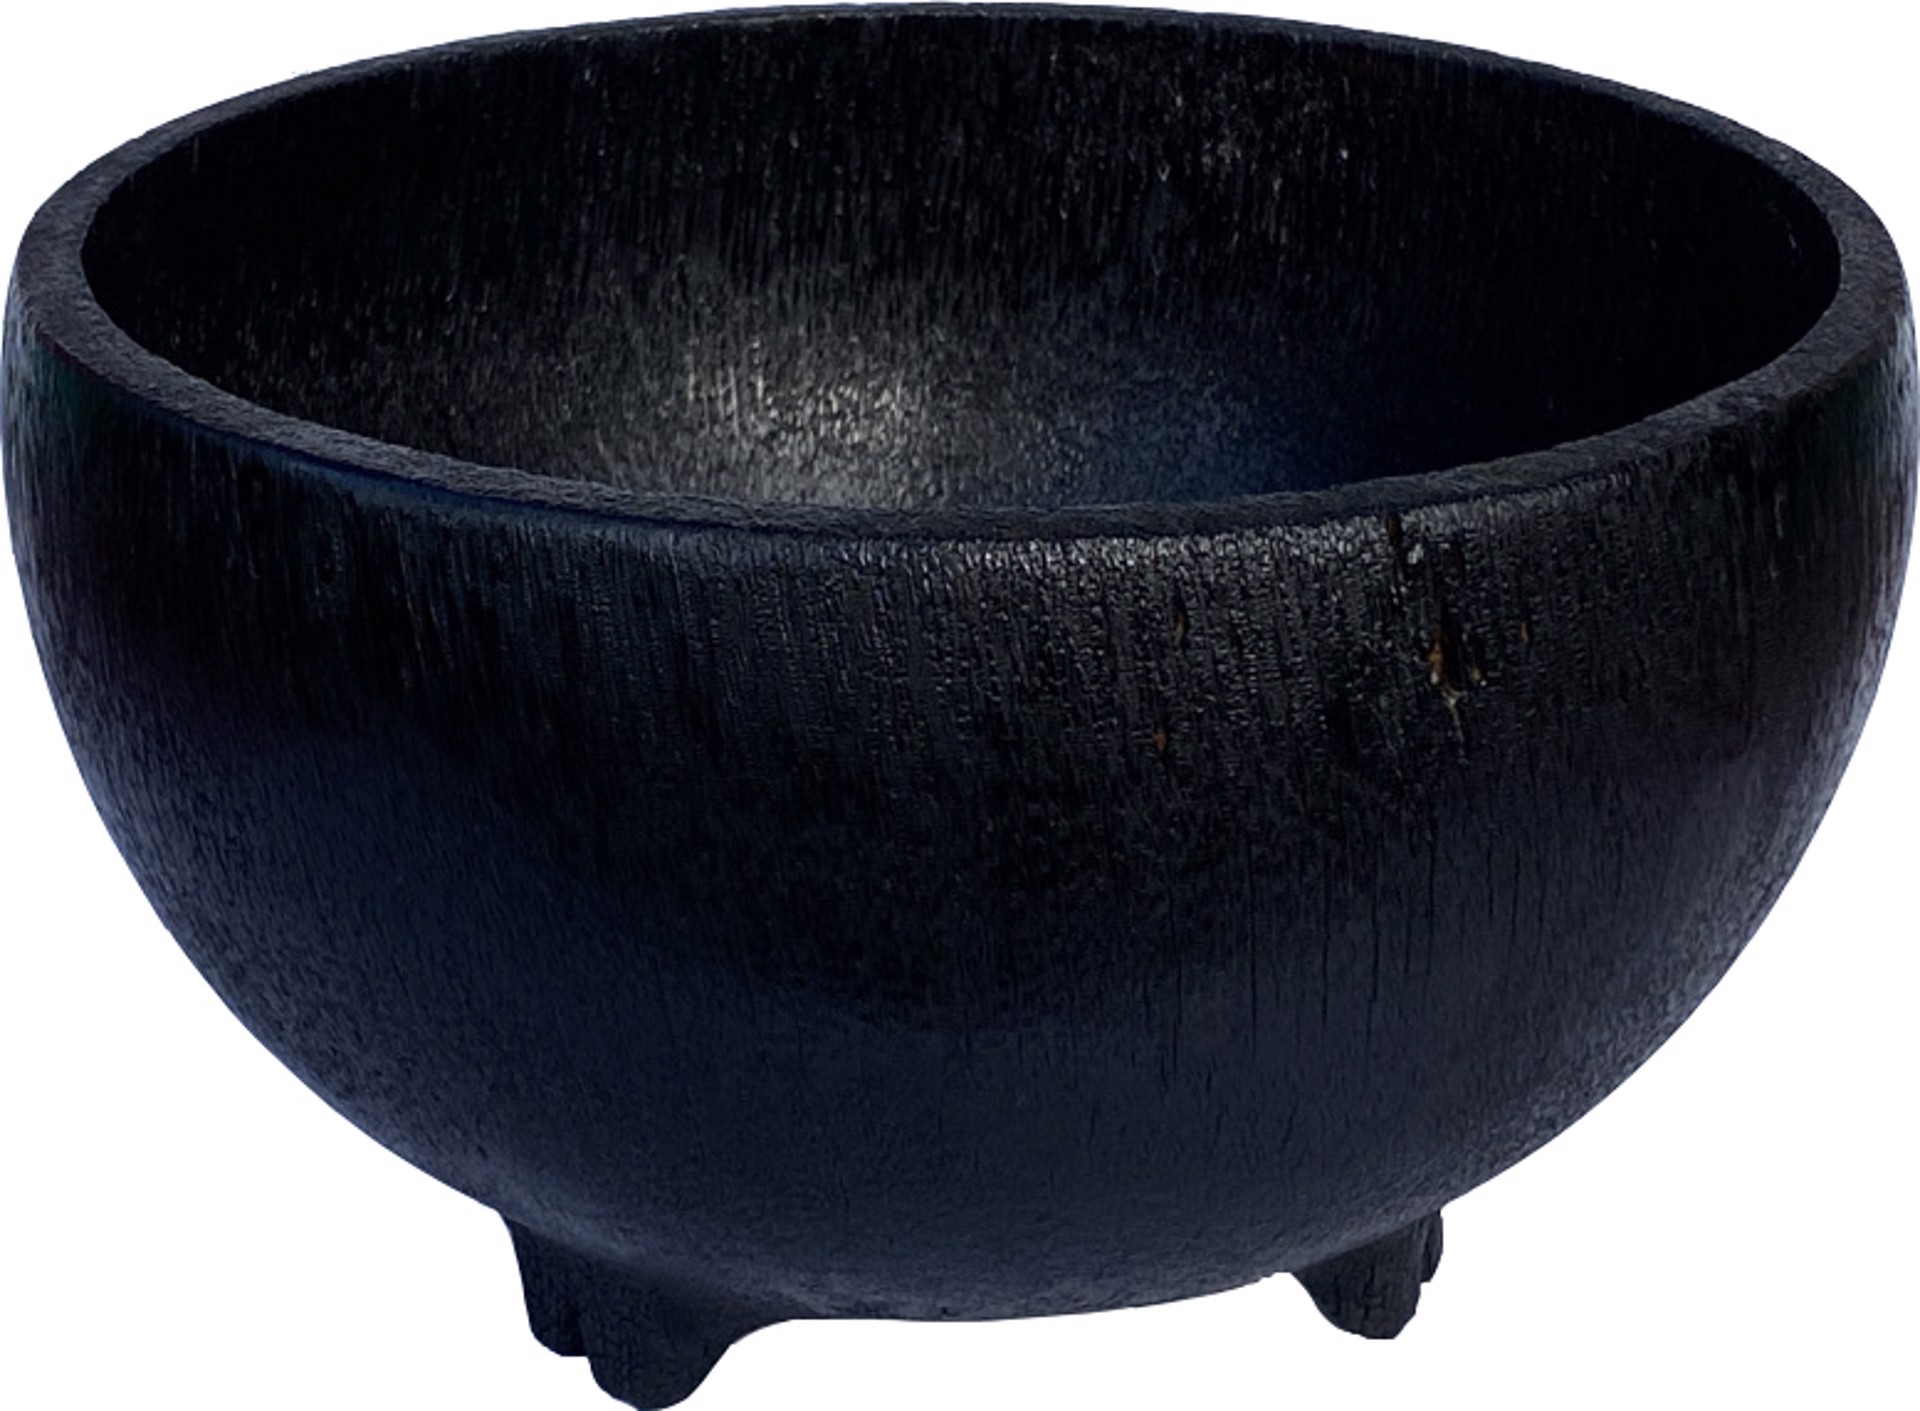 Carbonized Coconut Bowl with Feet by John Fackrell